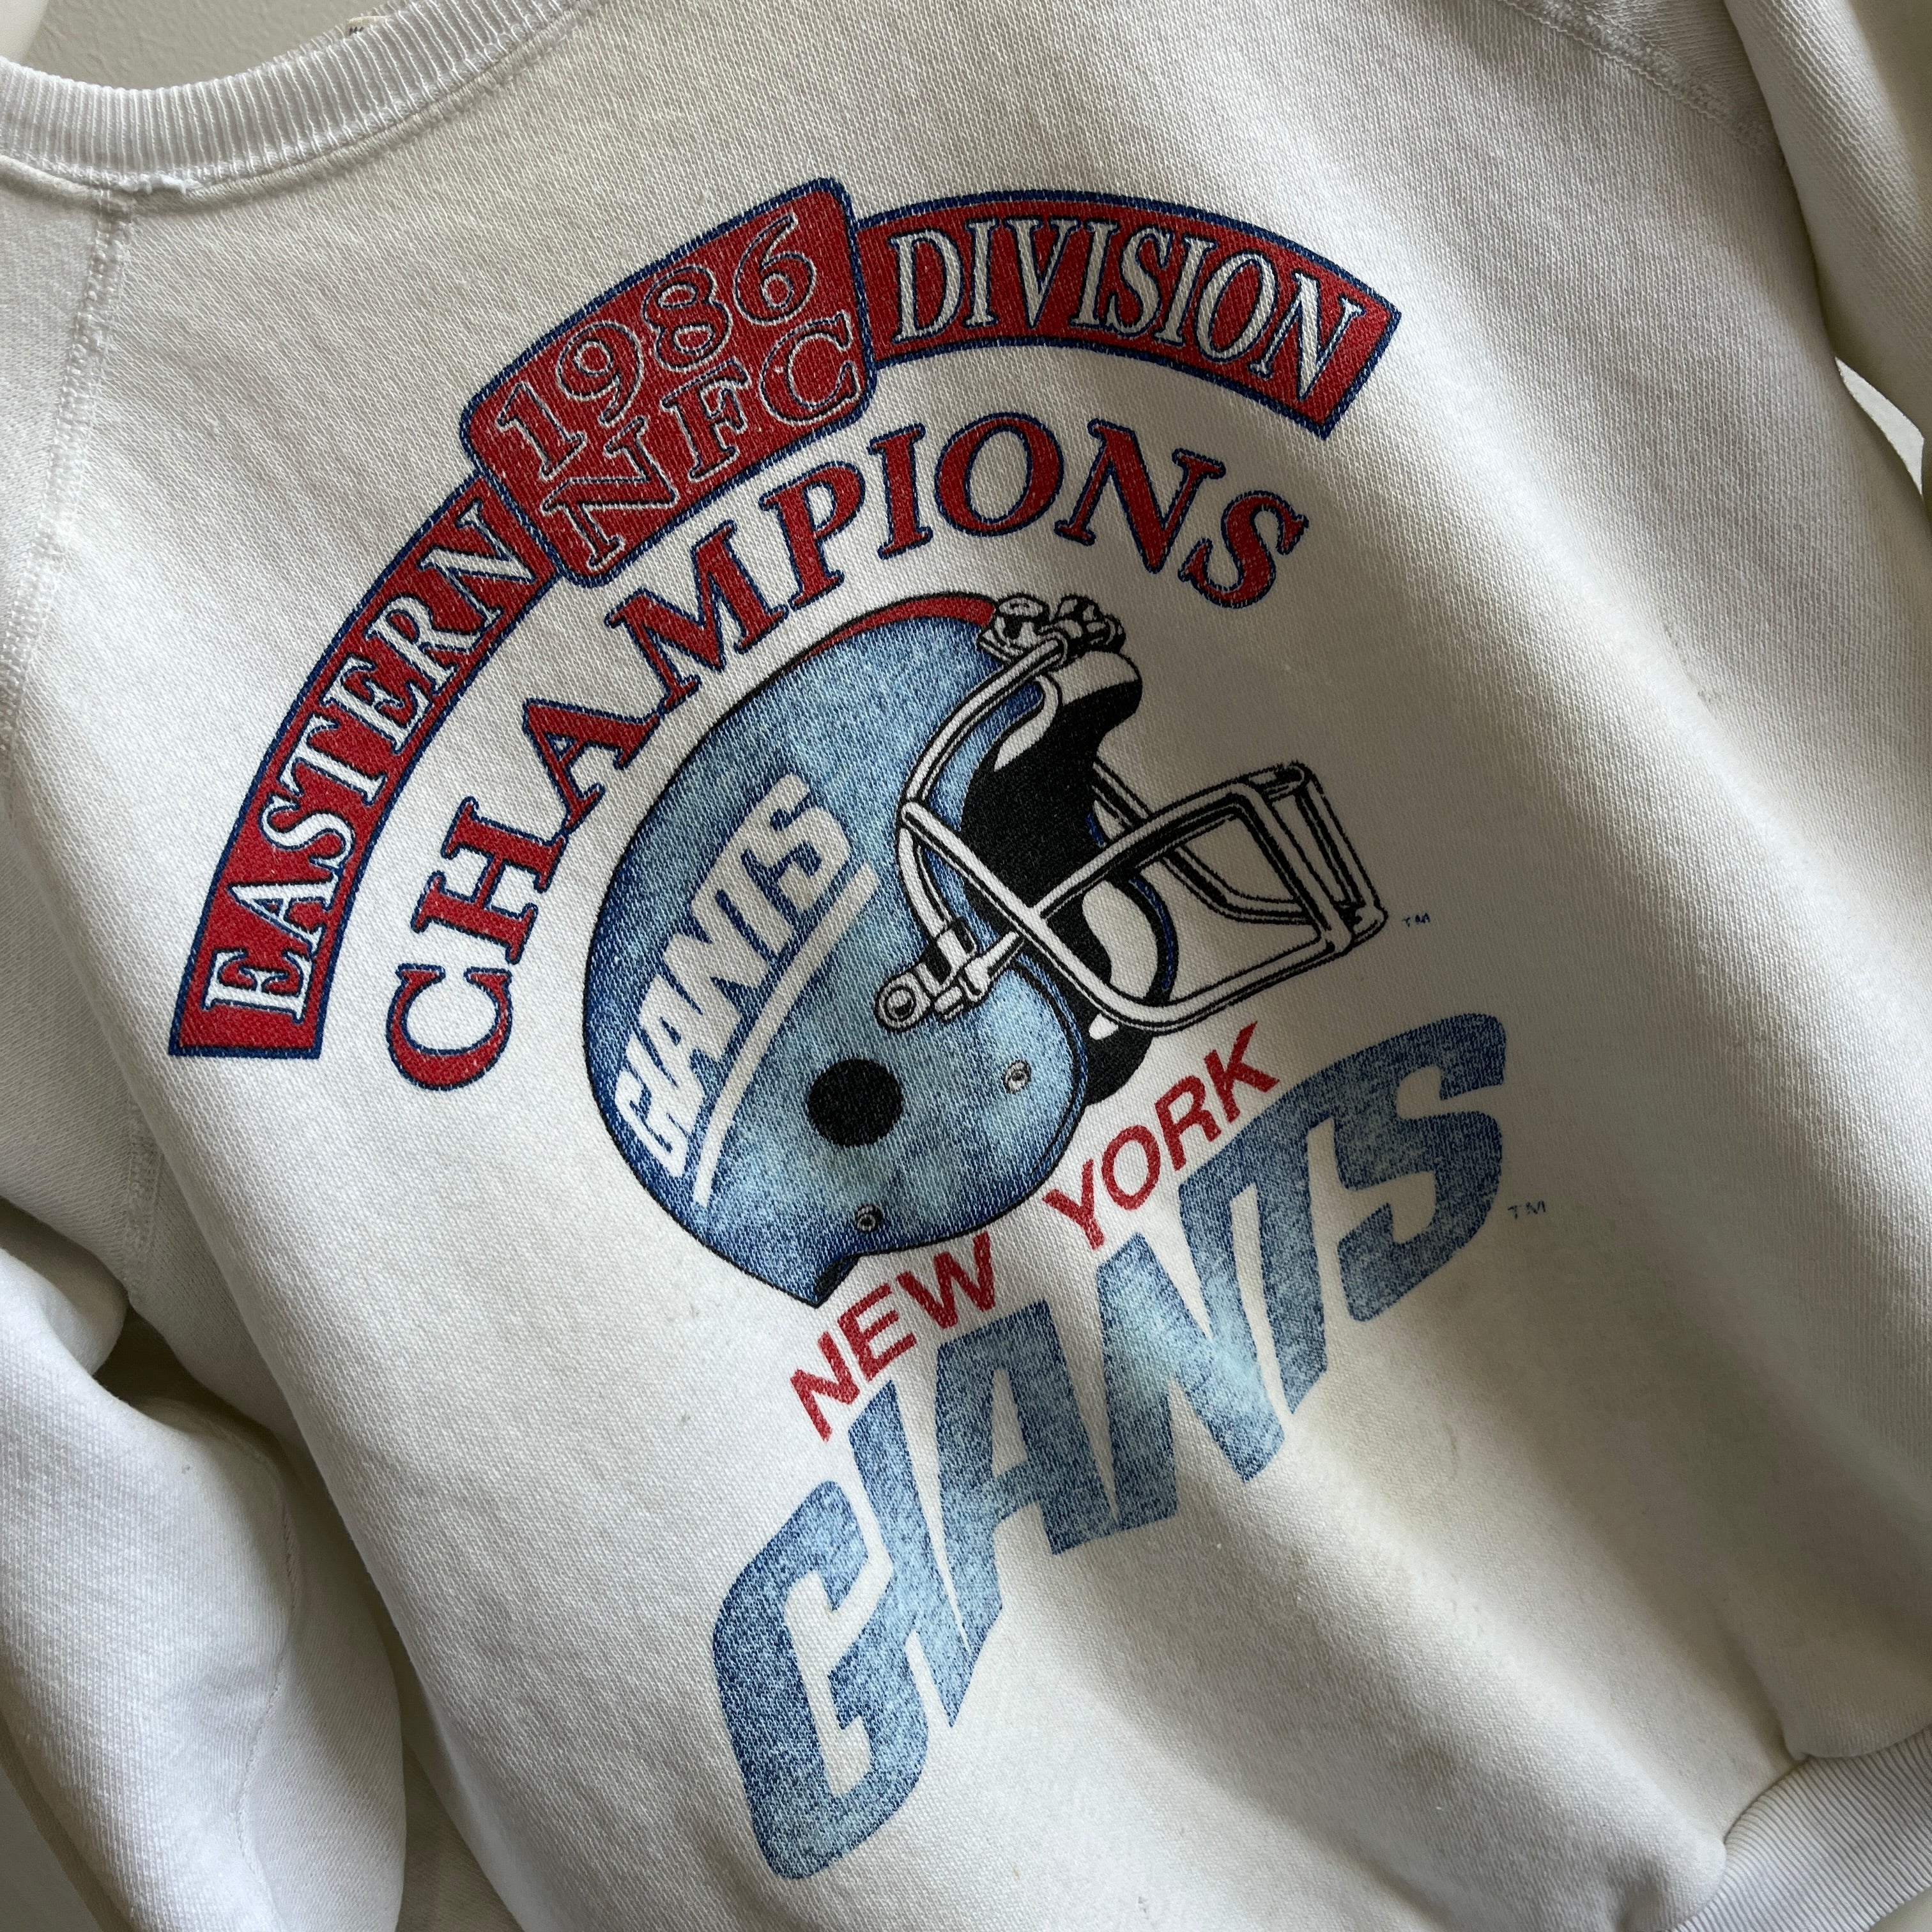 1986 New York Giants CHAMPIONS Sweatshirt by Trench – Red Vintage Co